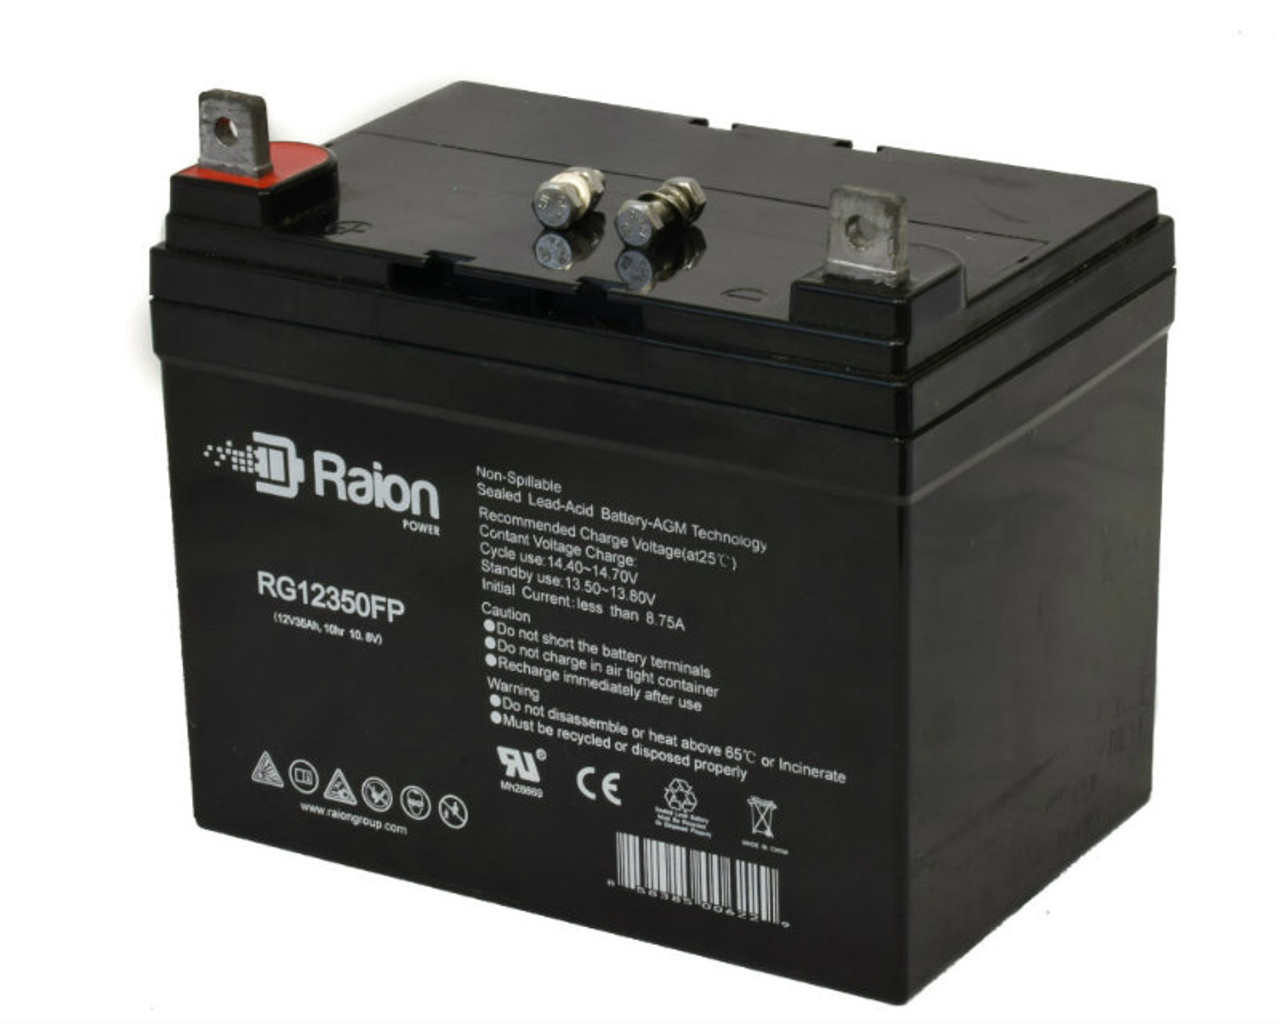 Raion Power Replacement 12V 35Ah RG12350FP Mobility Scooter Battery for Invacare Pronto M41